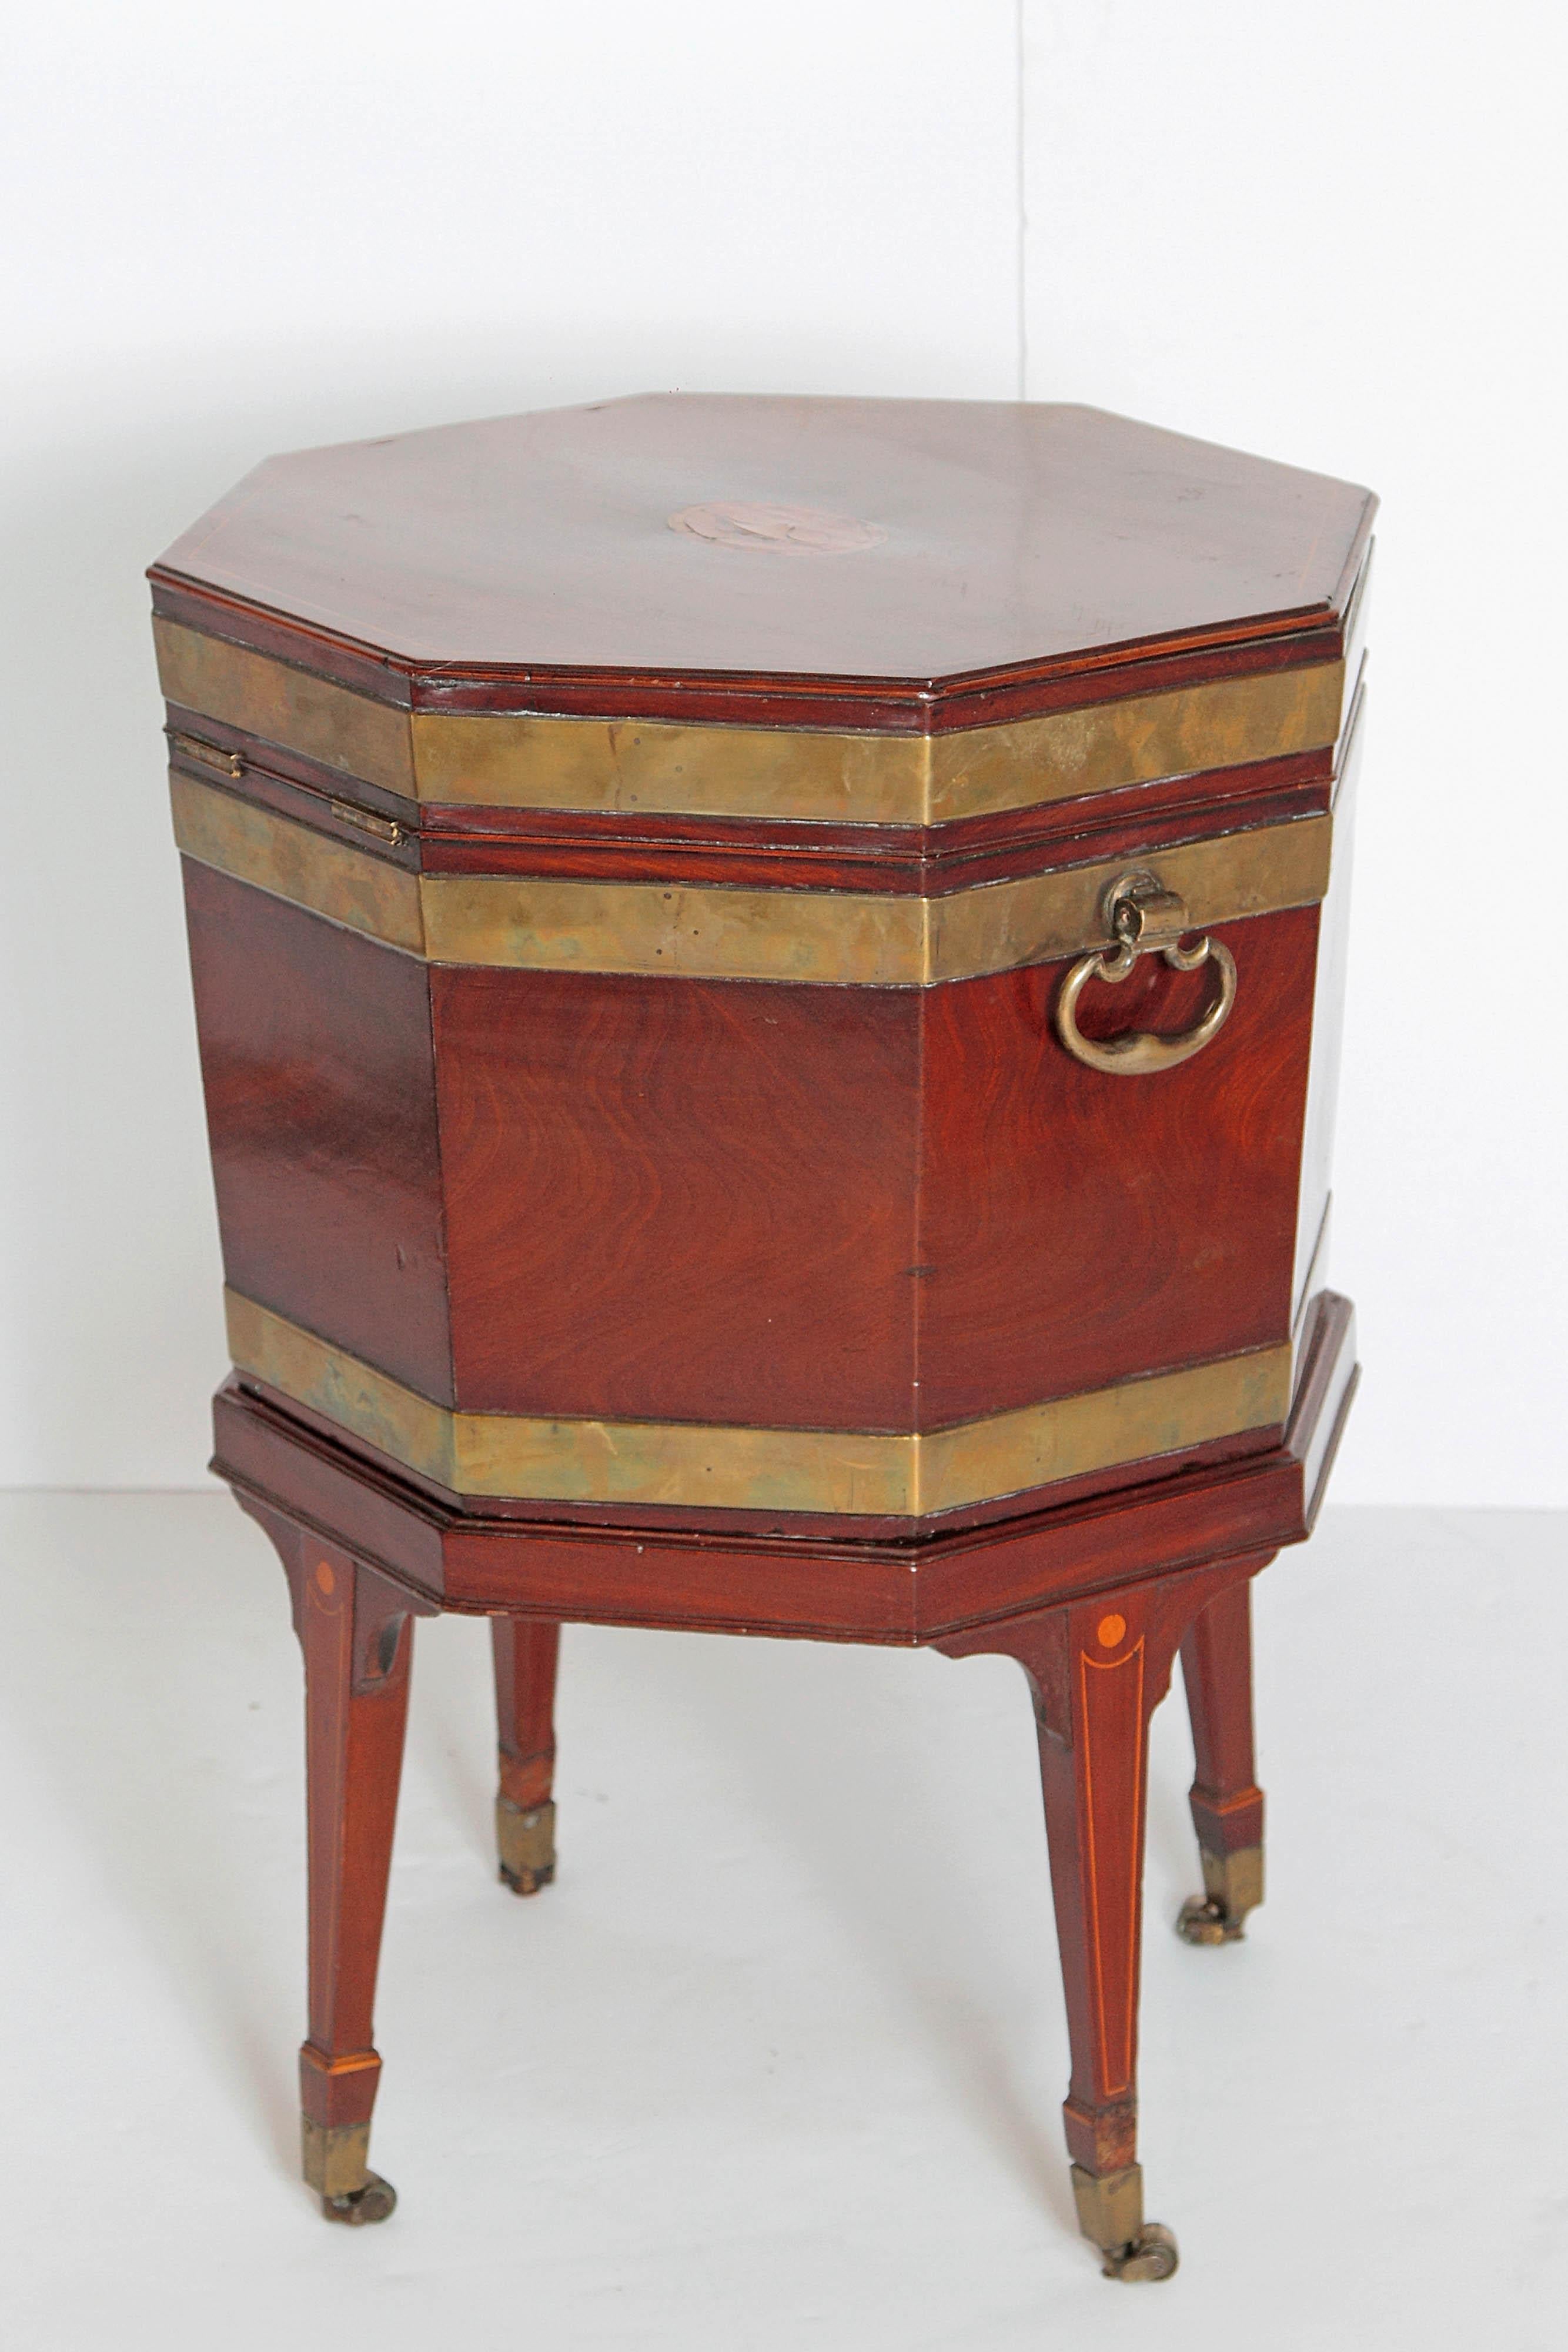 George III Mahogany and Brass Cellarette/Wine Cooler 1